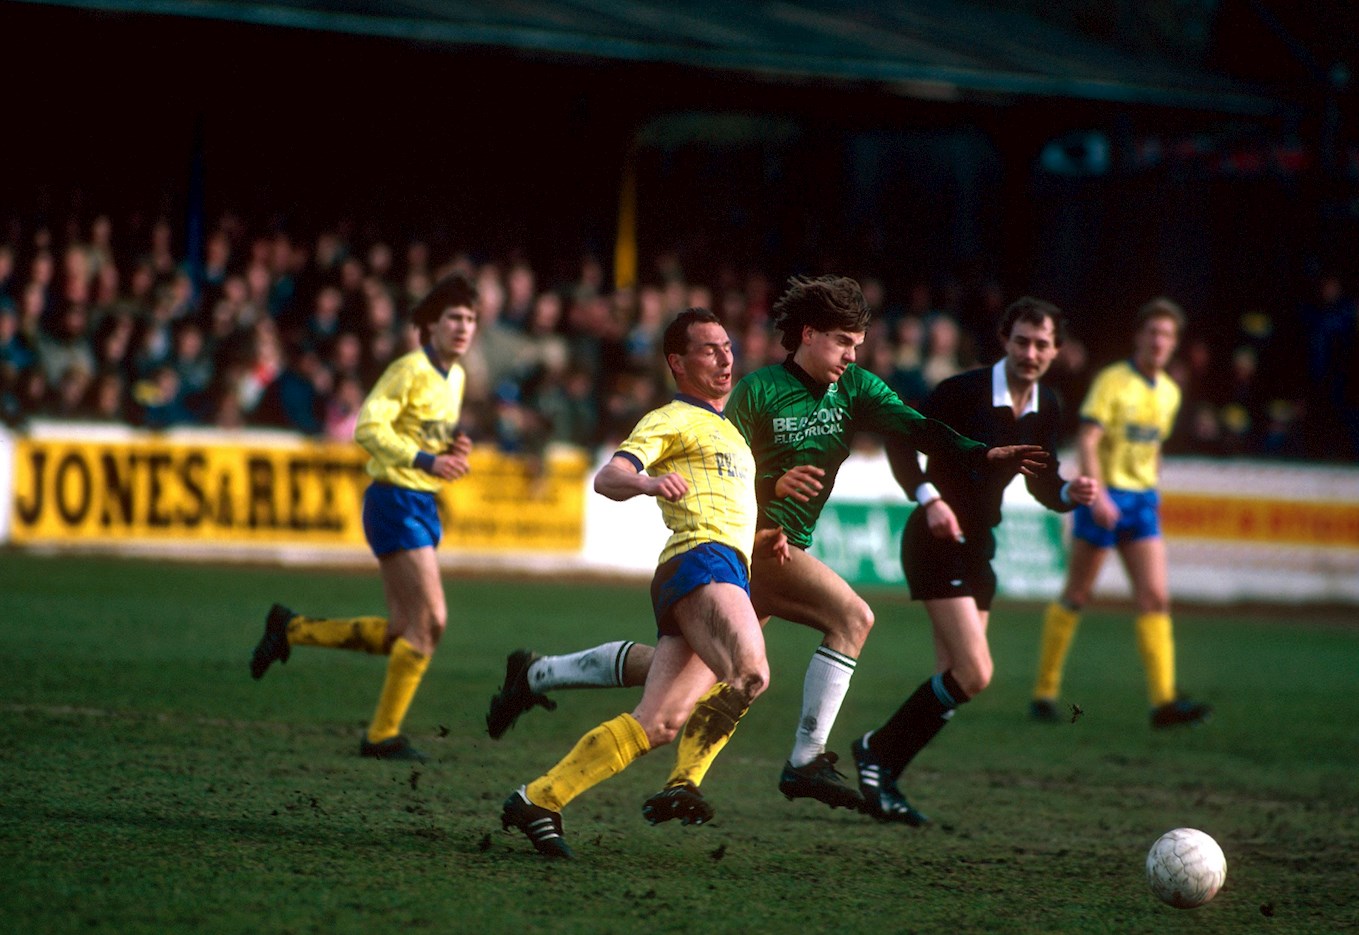 David Phillips playing for Argyle